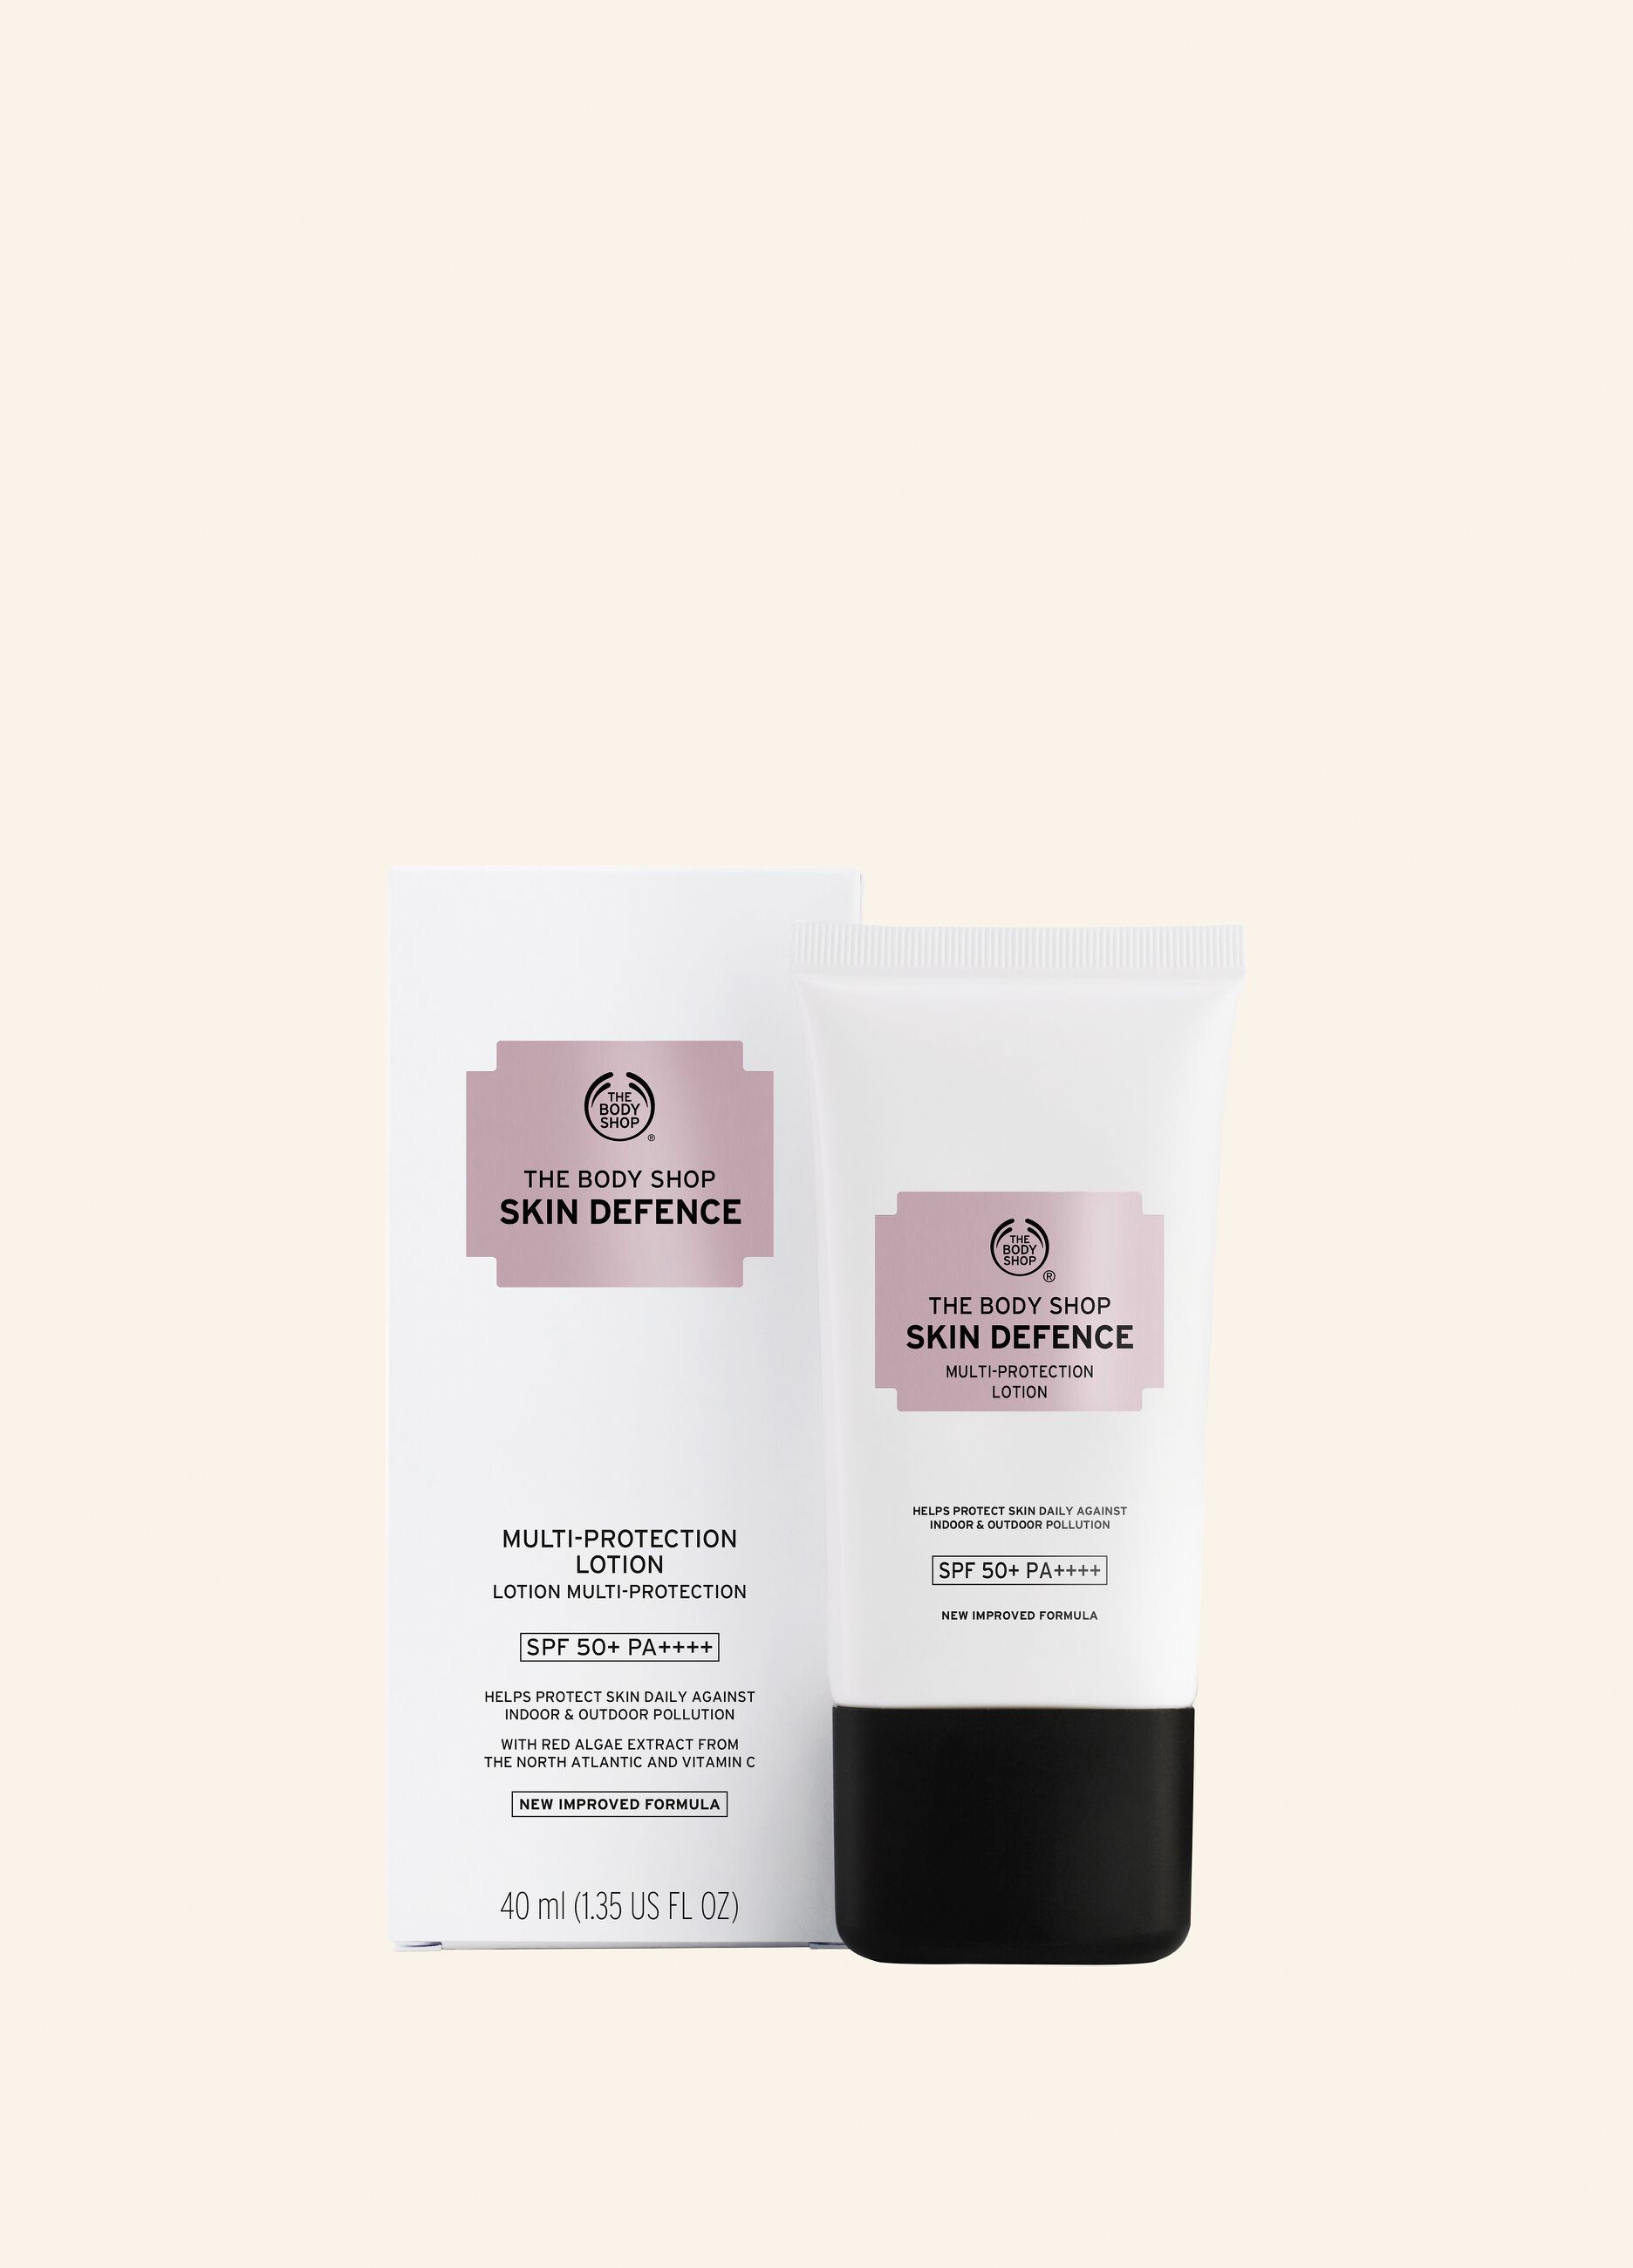 The Body Shop multi-protection lotion Spf 50+ Pa++++